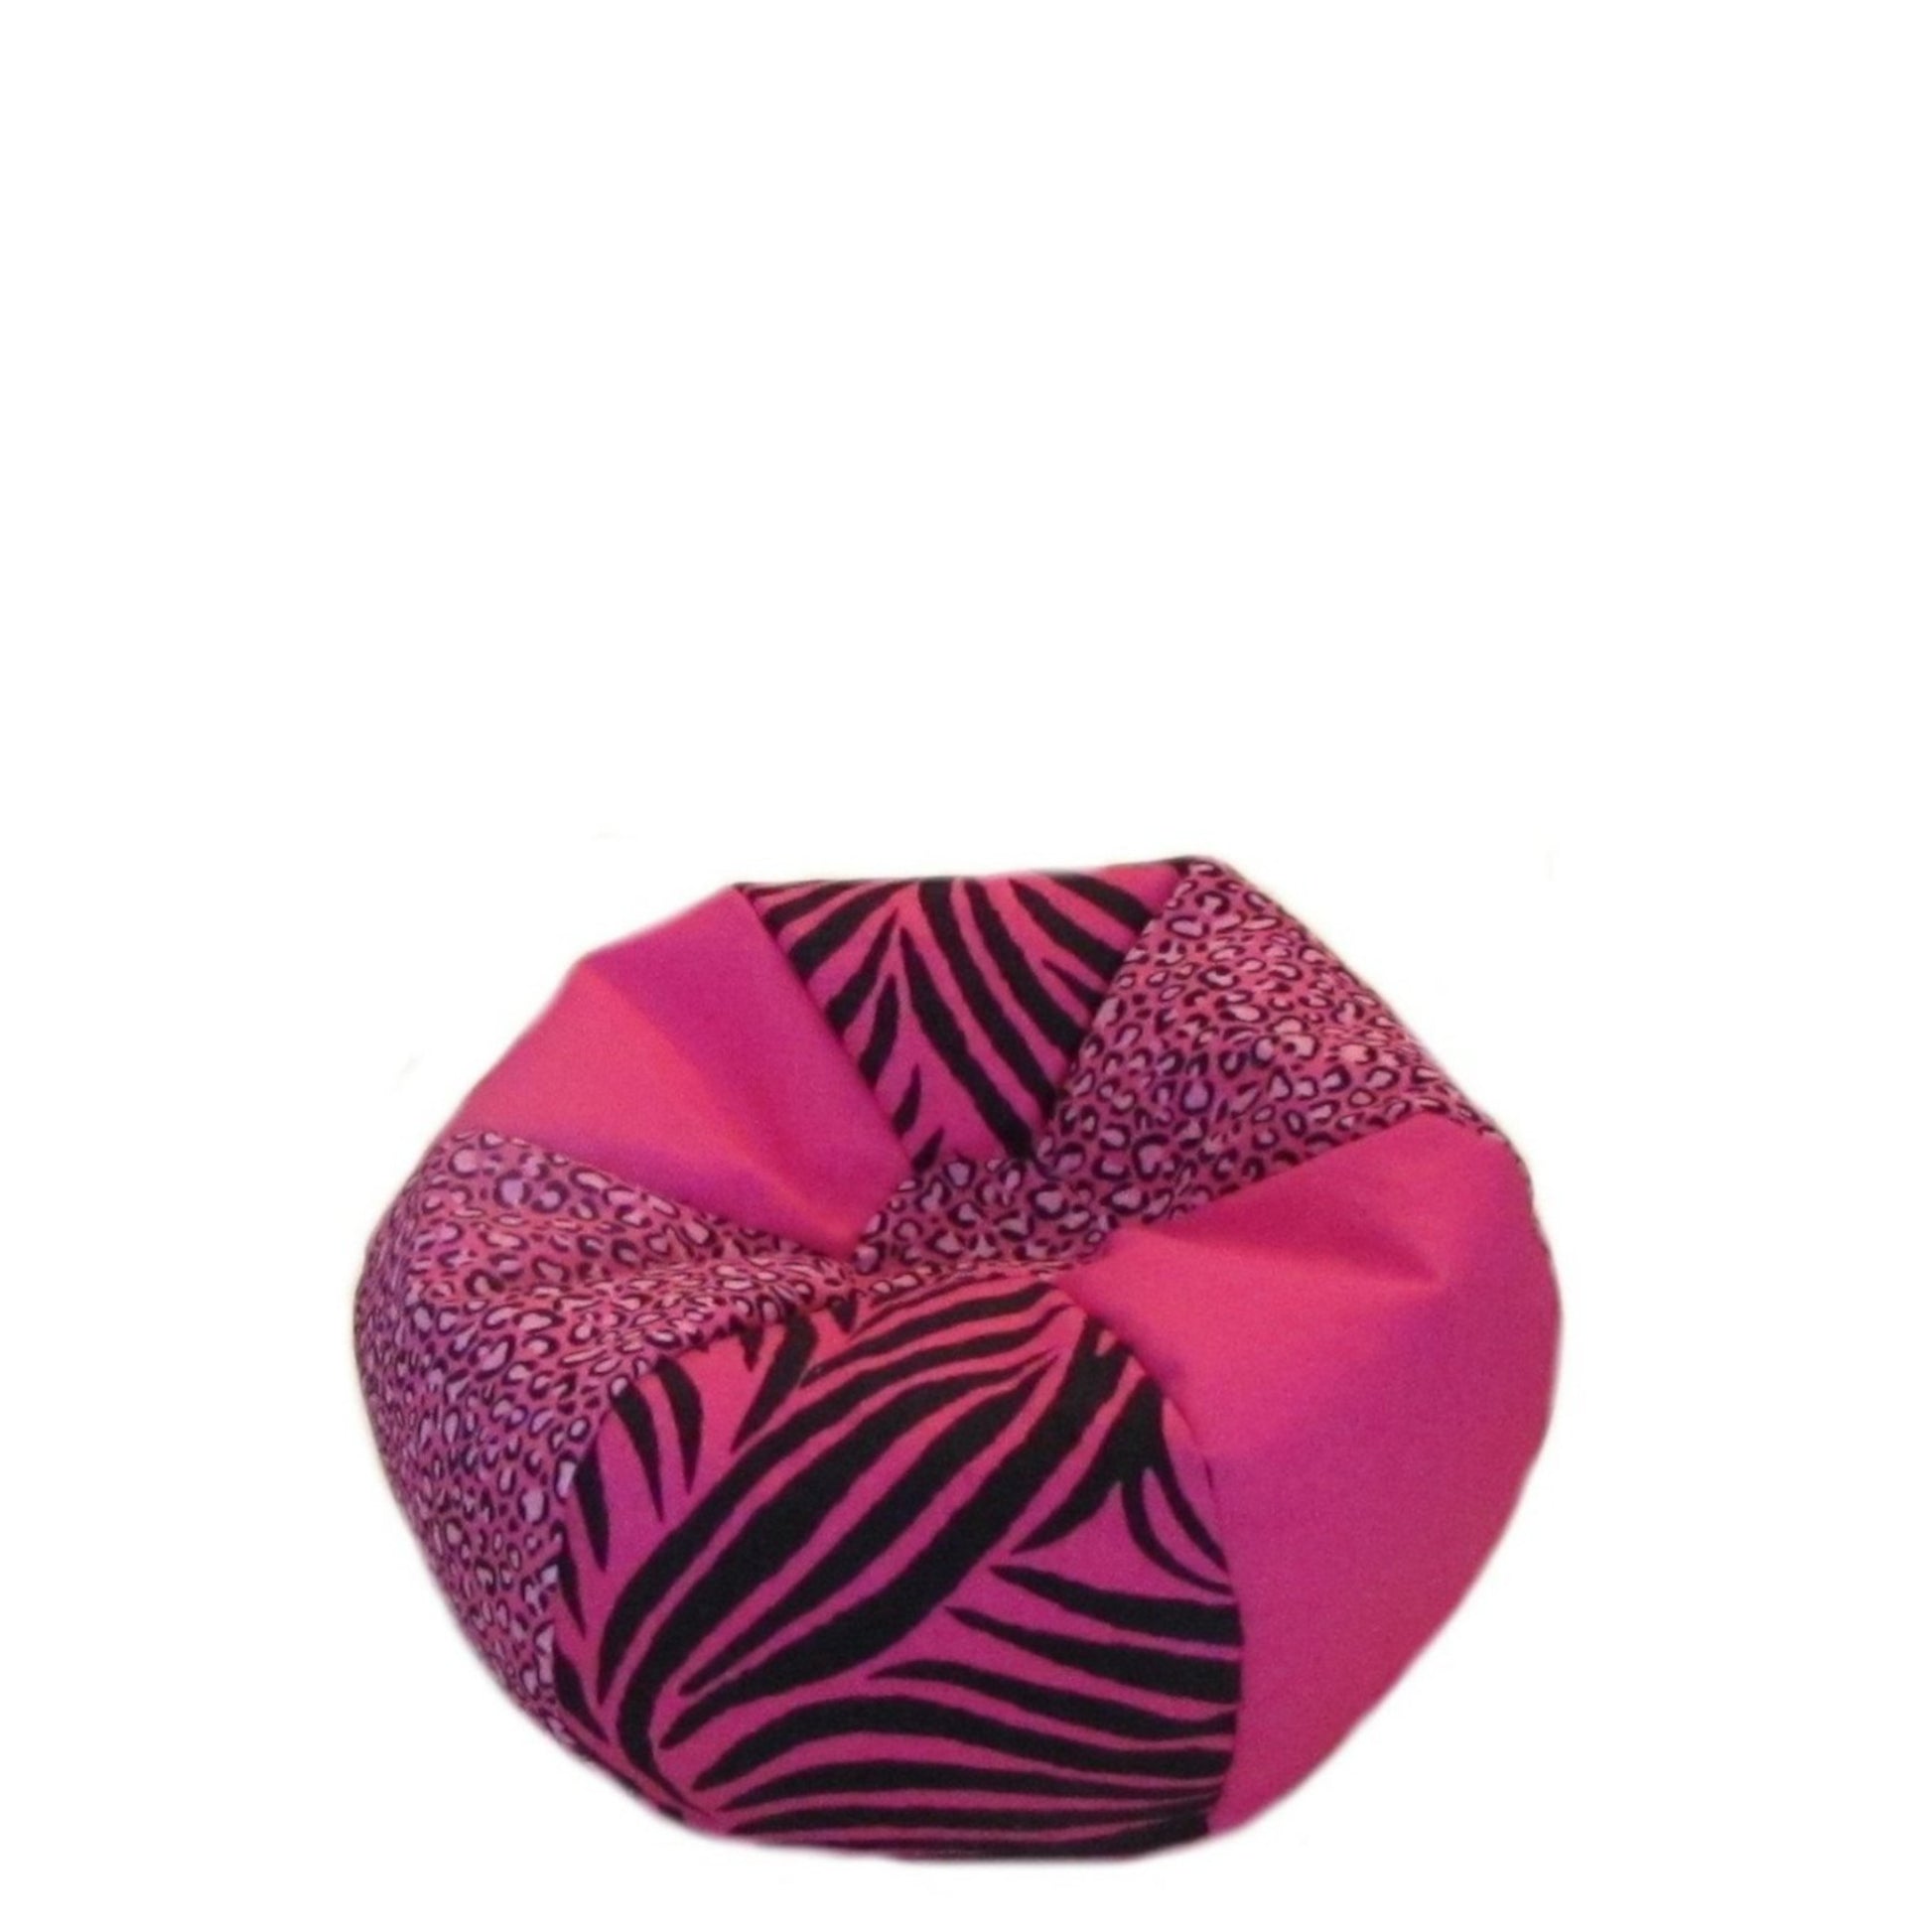 Pink Cheetah Zebra Doll Bean Bag Chair for 18-inch dolls without doll